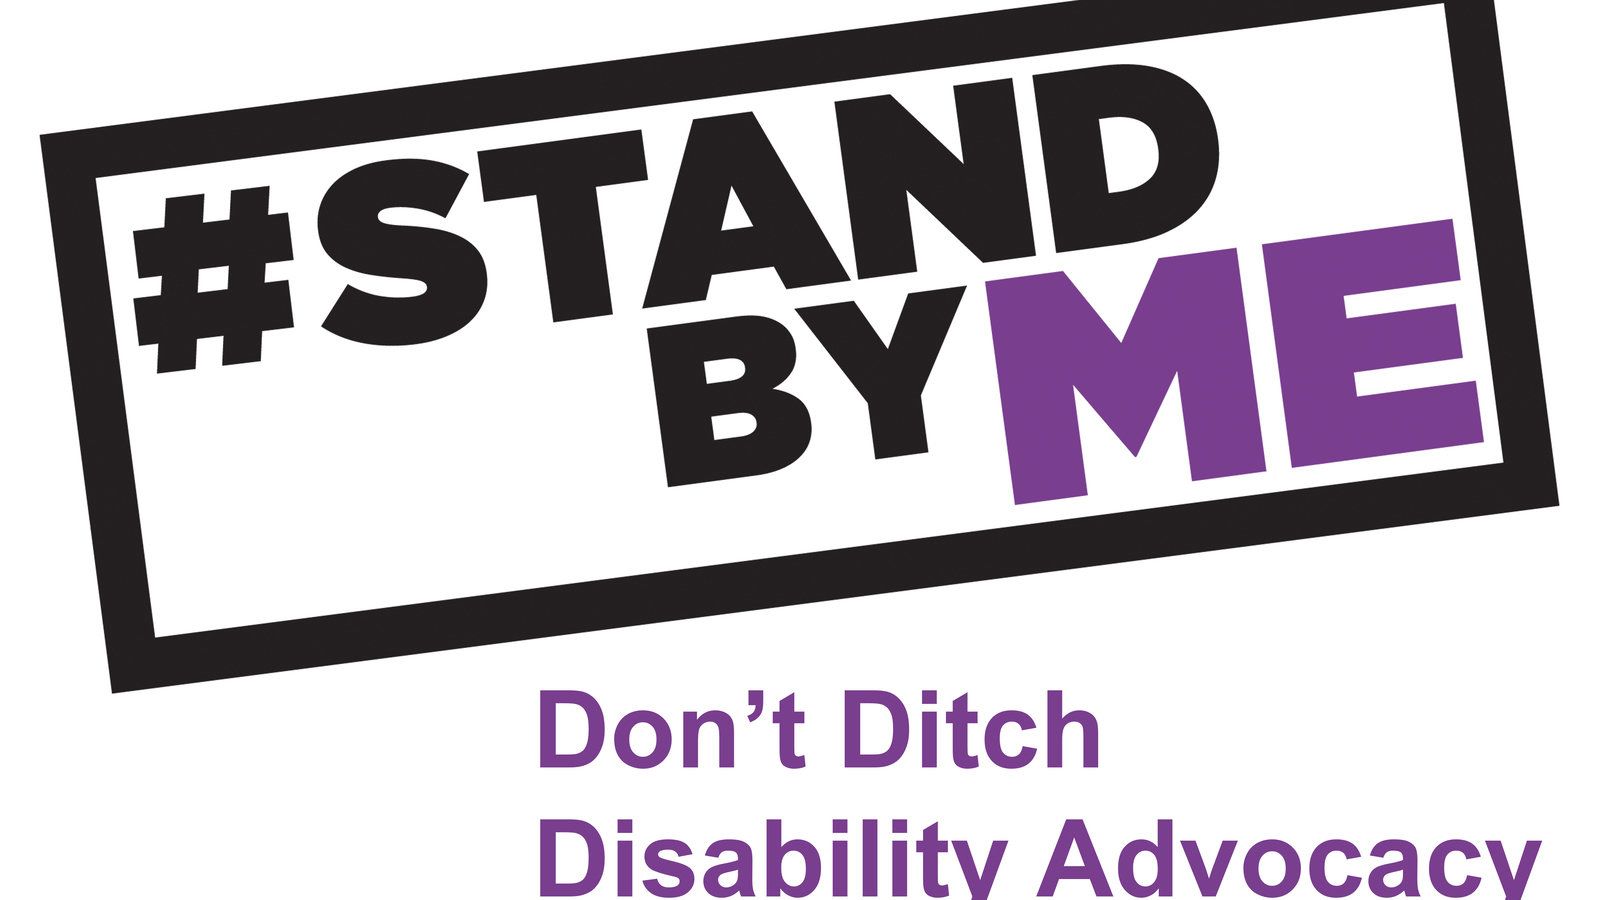 #standbyme - support disability 